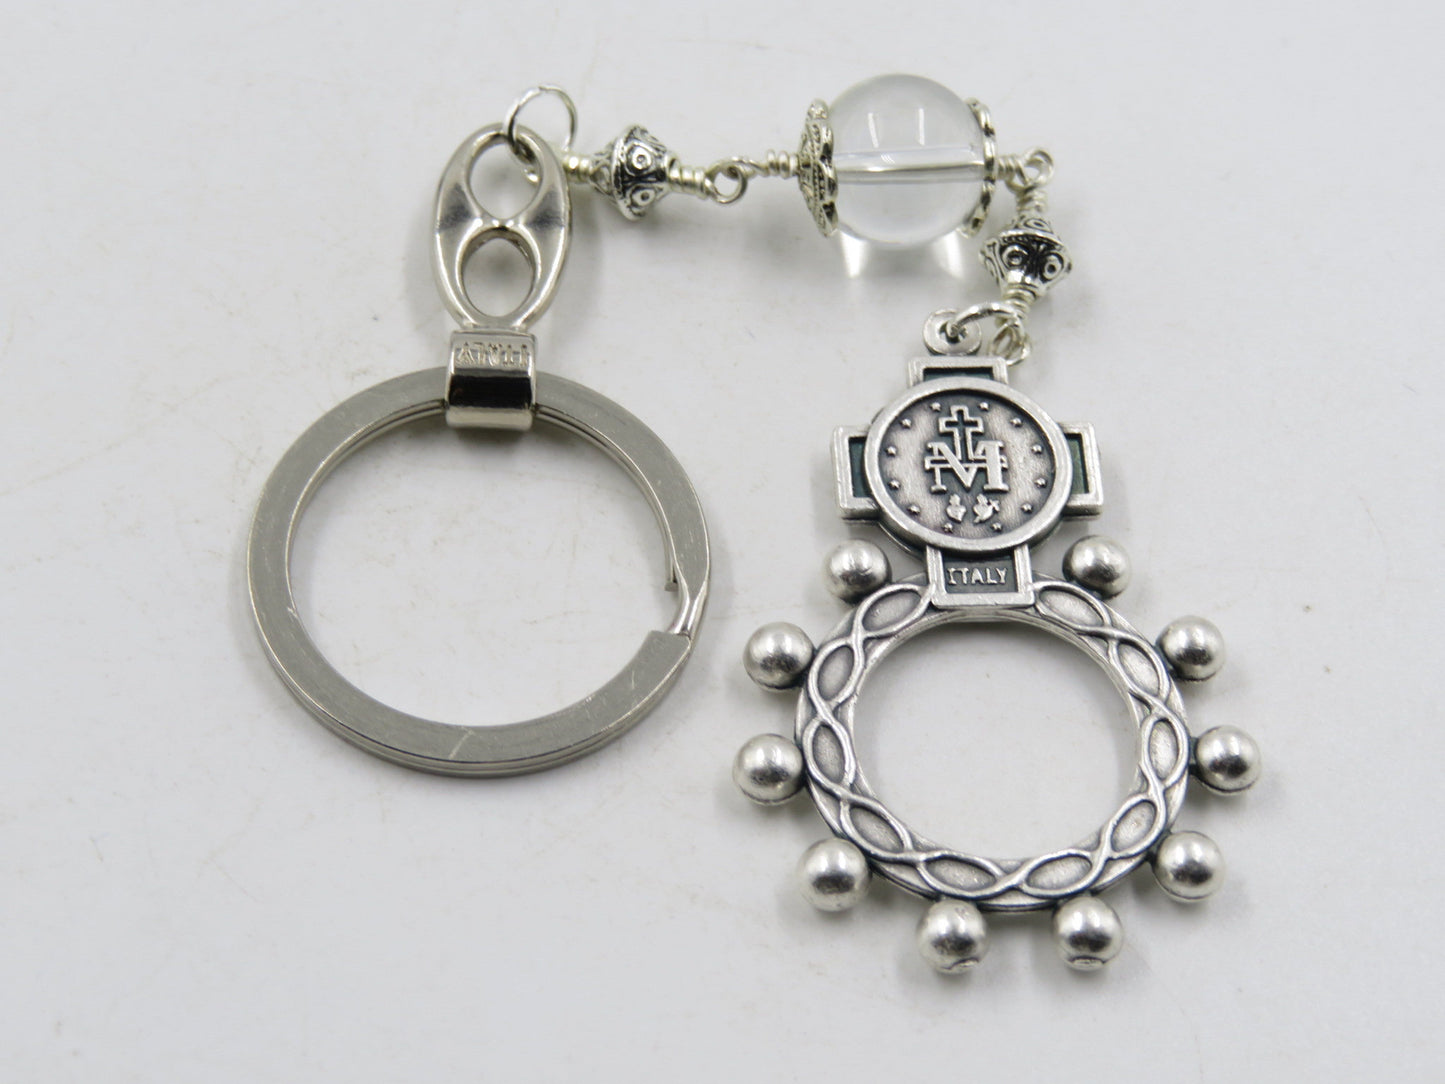 Miraculous medal Rosary Ring, Ten Hail Mary Rosary ring, Wire wrapped Bead, Religious Keyring.